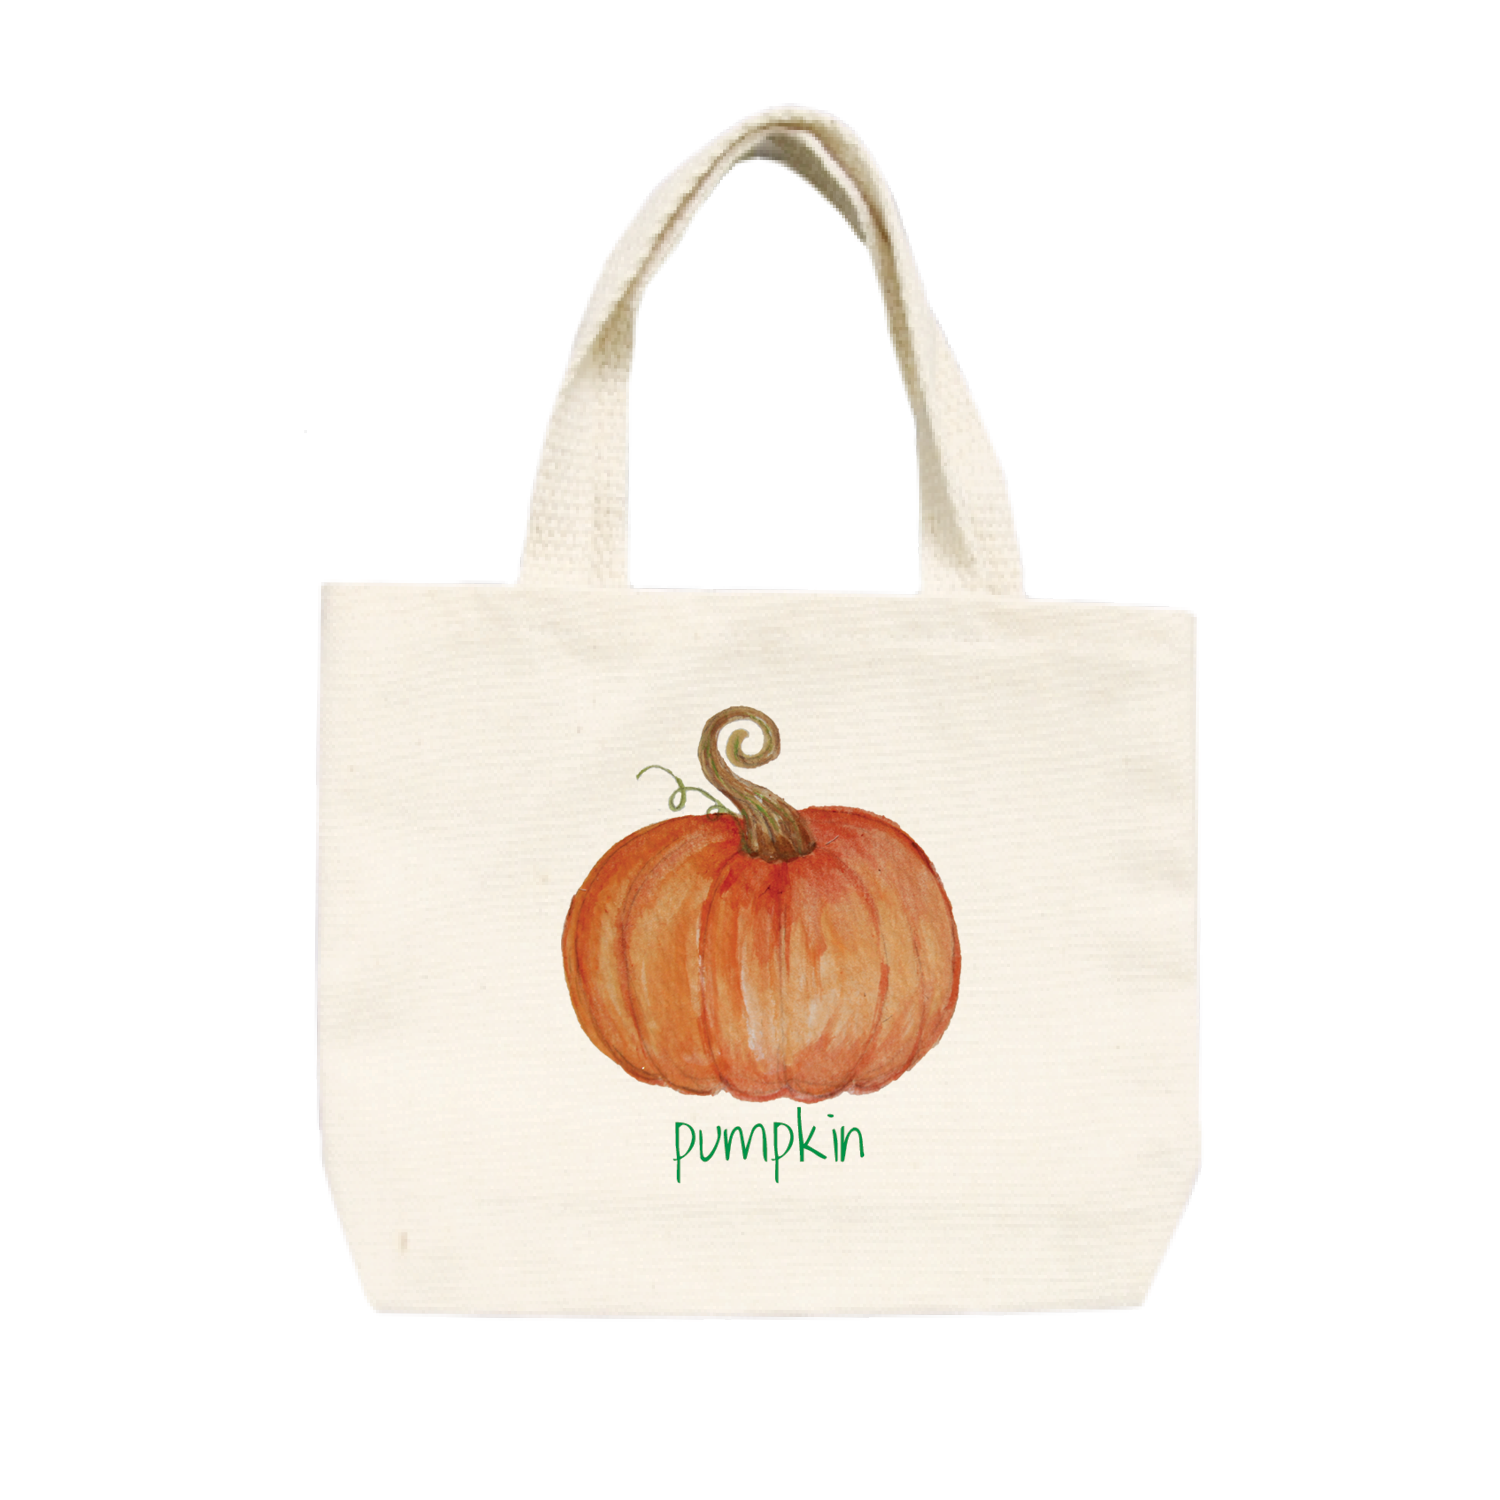 Pumpkin with pumpkin text small tote